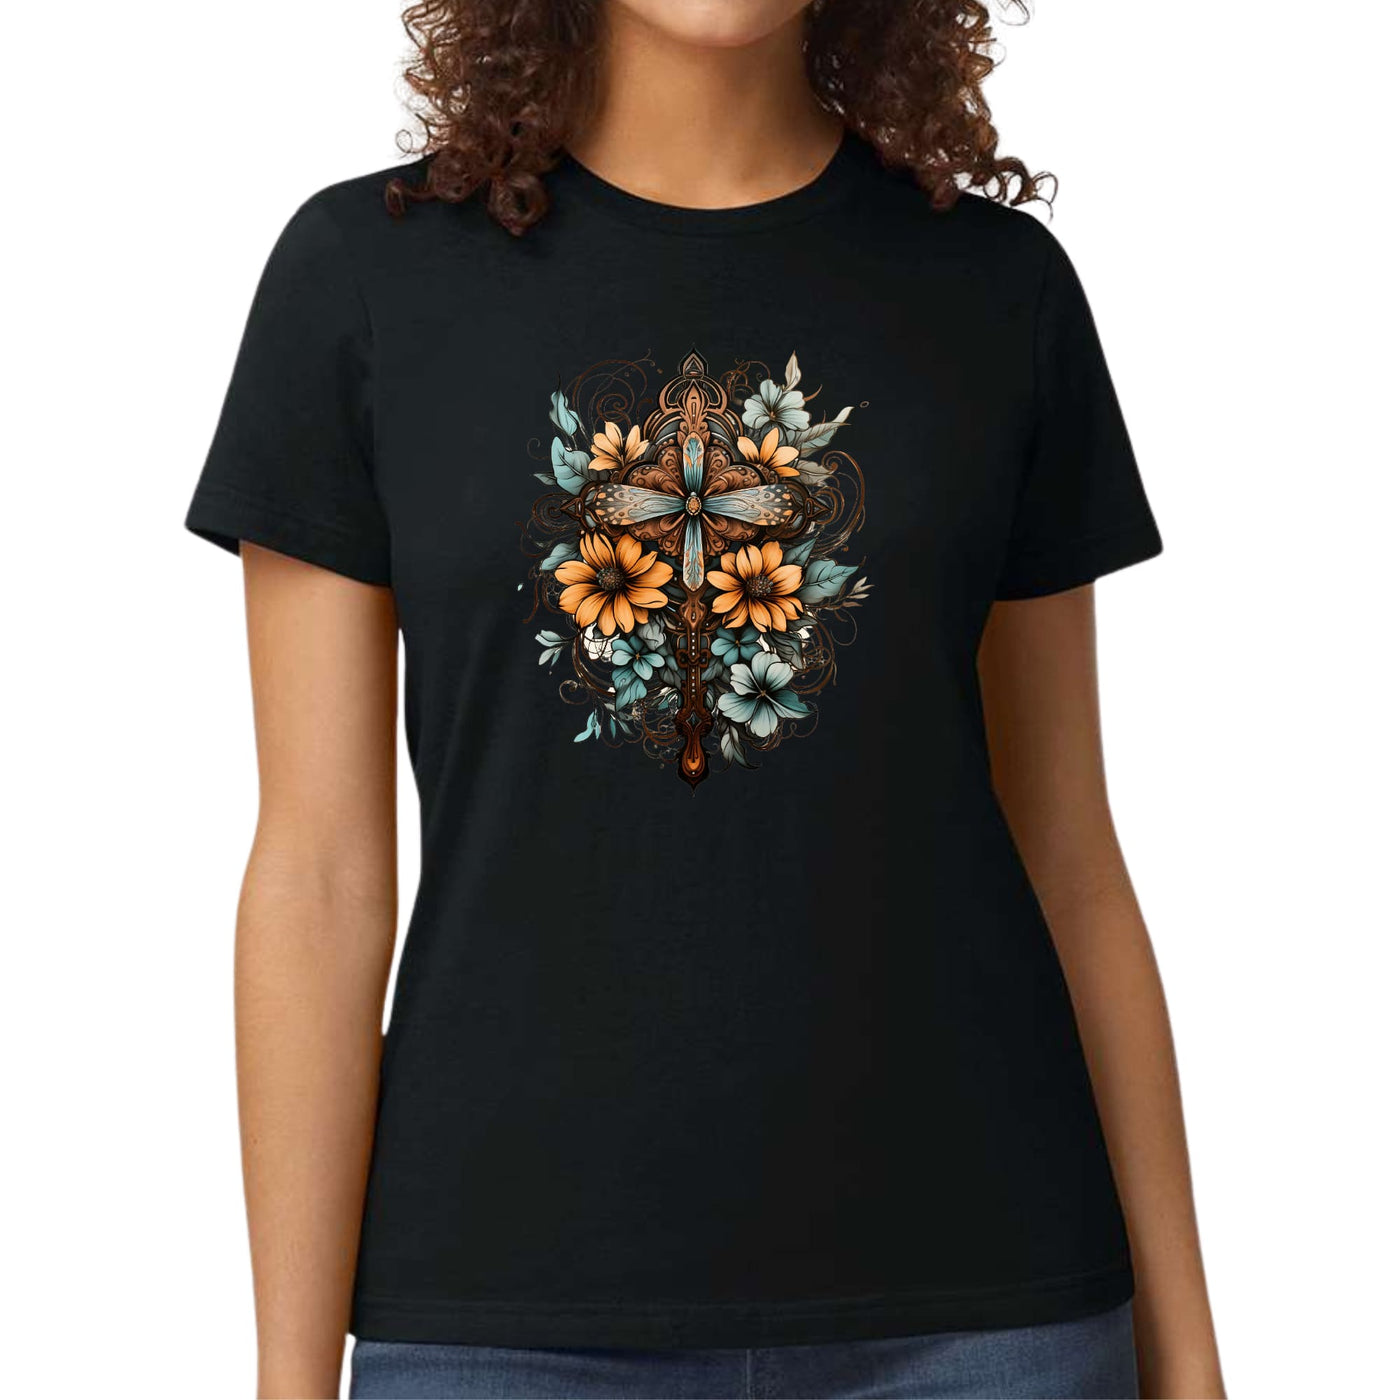 Womens Graphic T - shirt Blue Brown Yellow Christian Cross Floral - T - Shirts